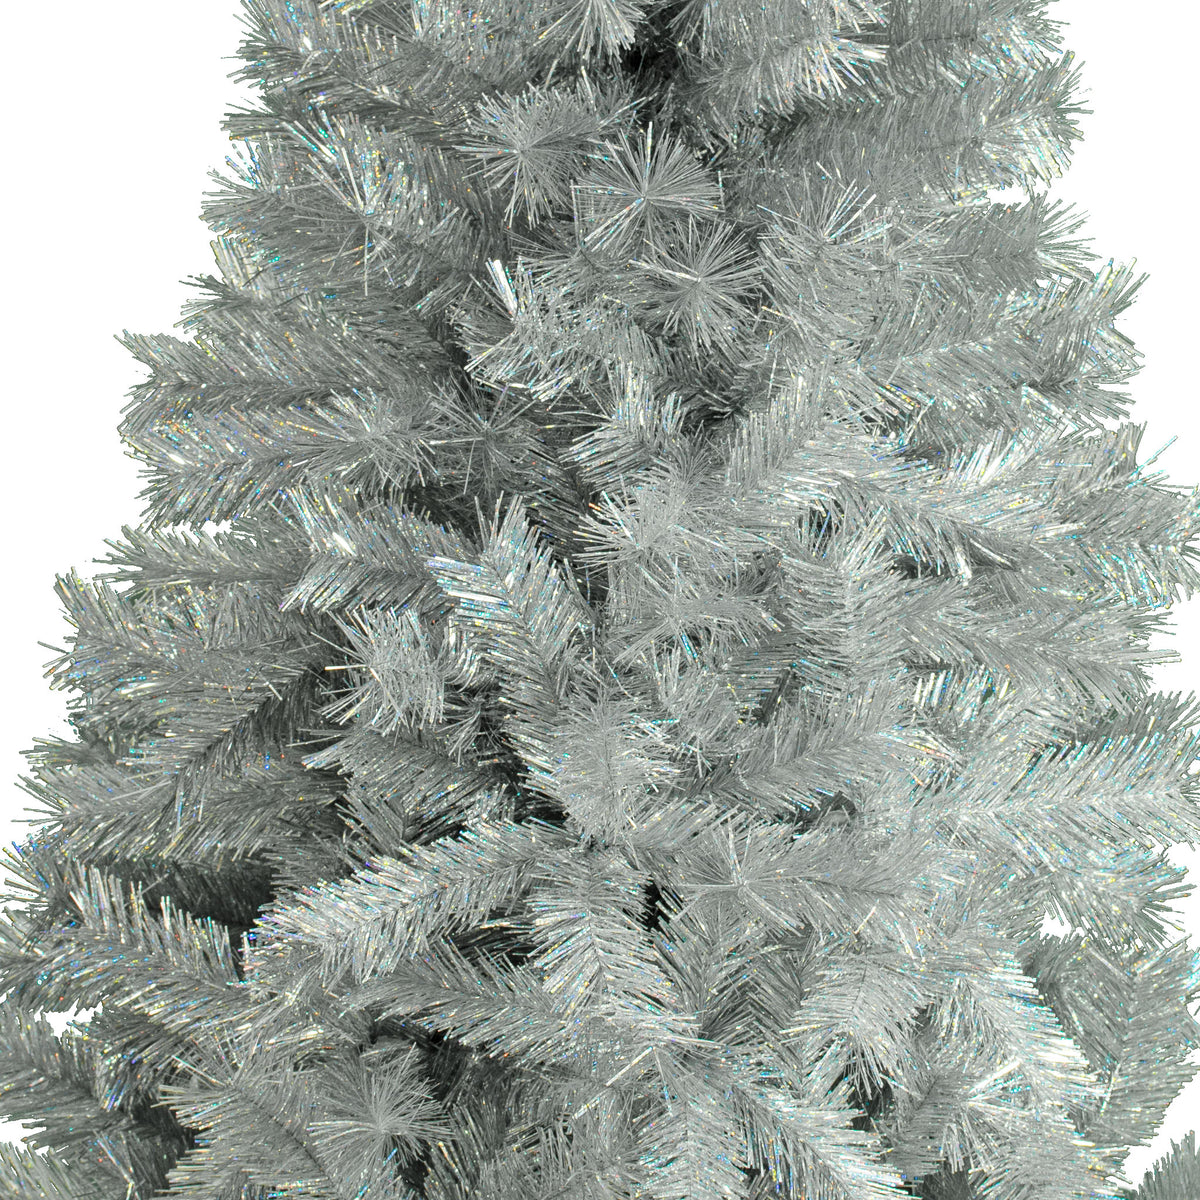 Crafted with meticulous attention to detail, each branch glistens with high-quality, shimmering silver tinsel that captures and reflects light, creating a dazzling display that will leave your guests in awe.